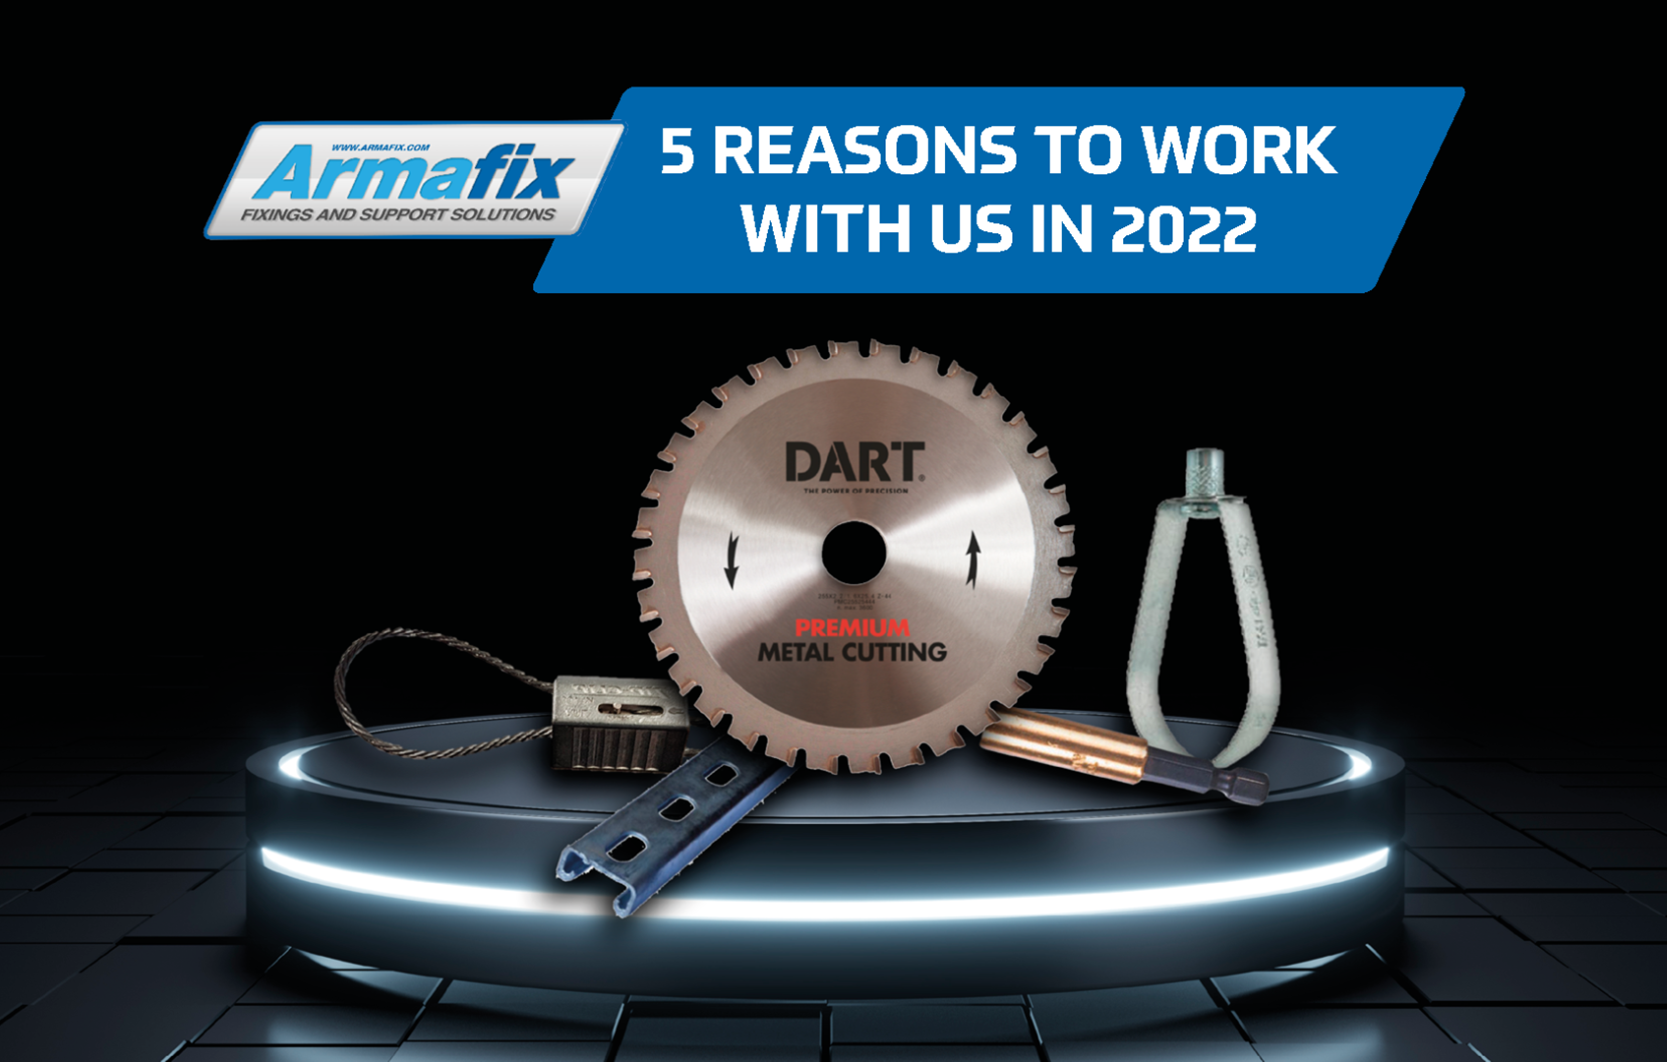 5 Reasons to Work with Armafix in 2022